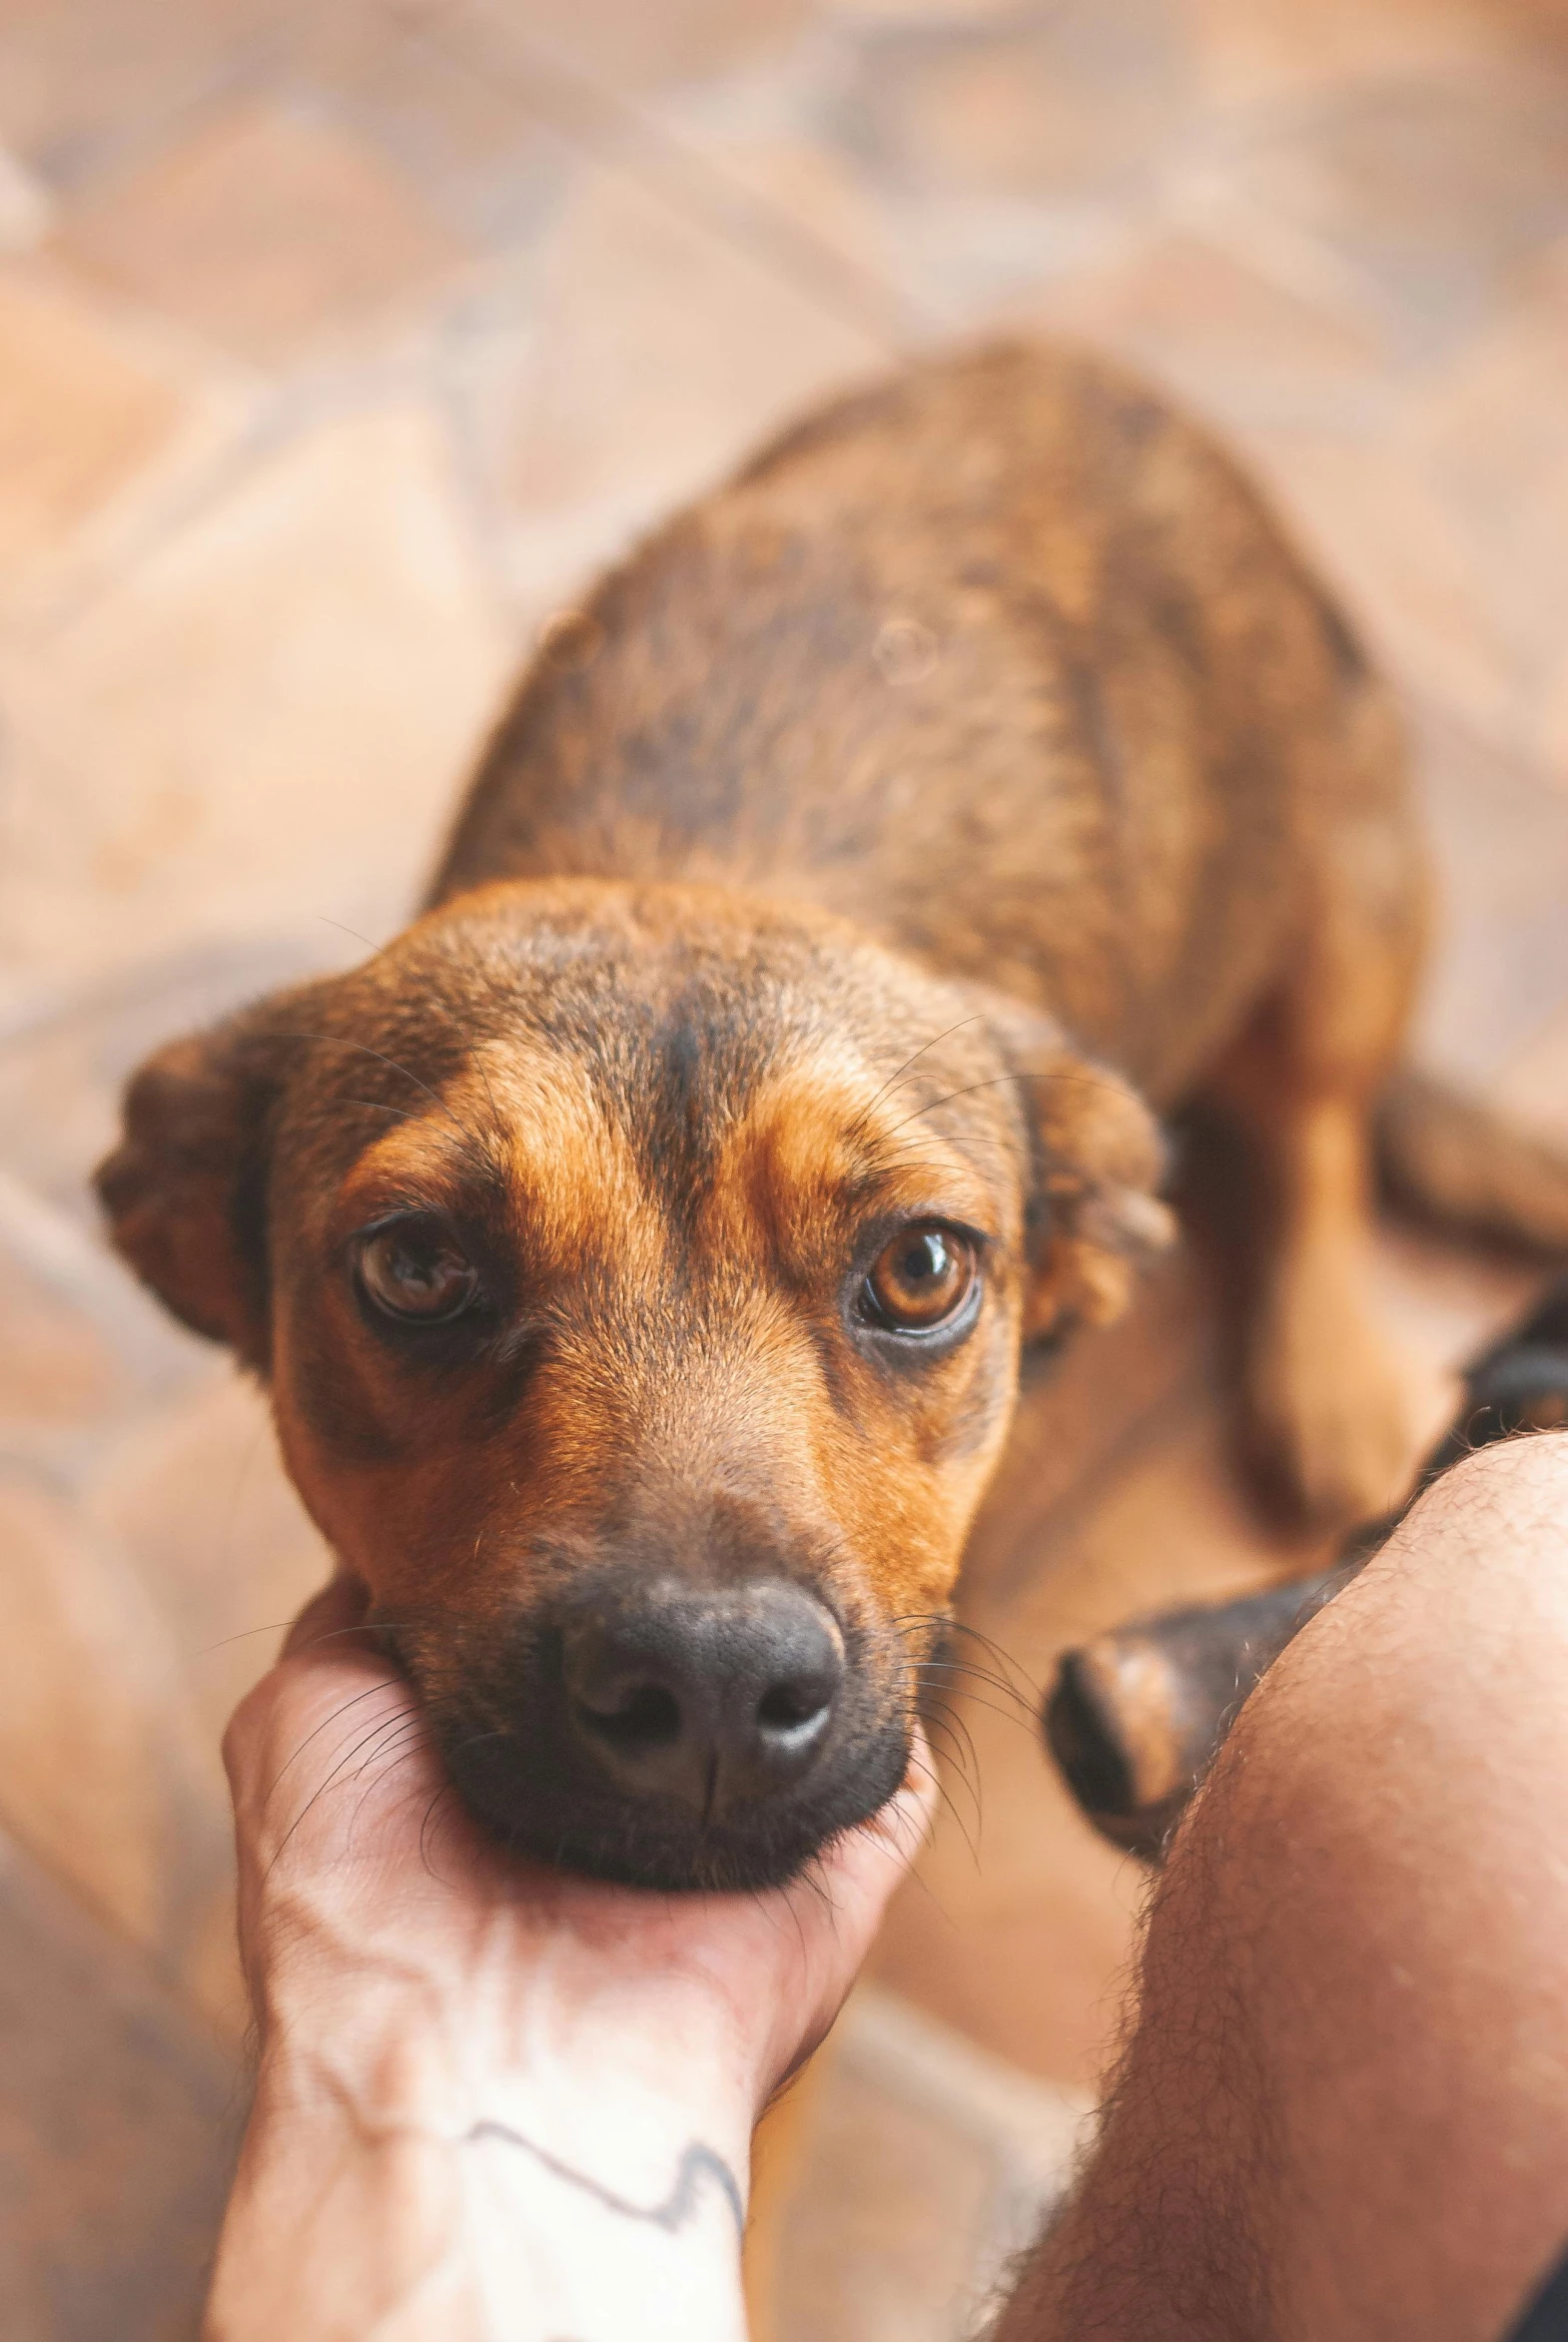 a close up of a person holding a dog in their hand, sri lanka, adopt, brown:-2, concerned